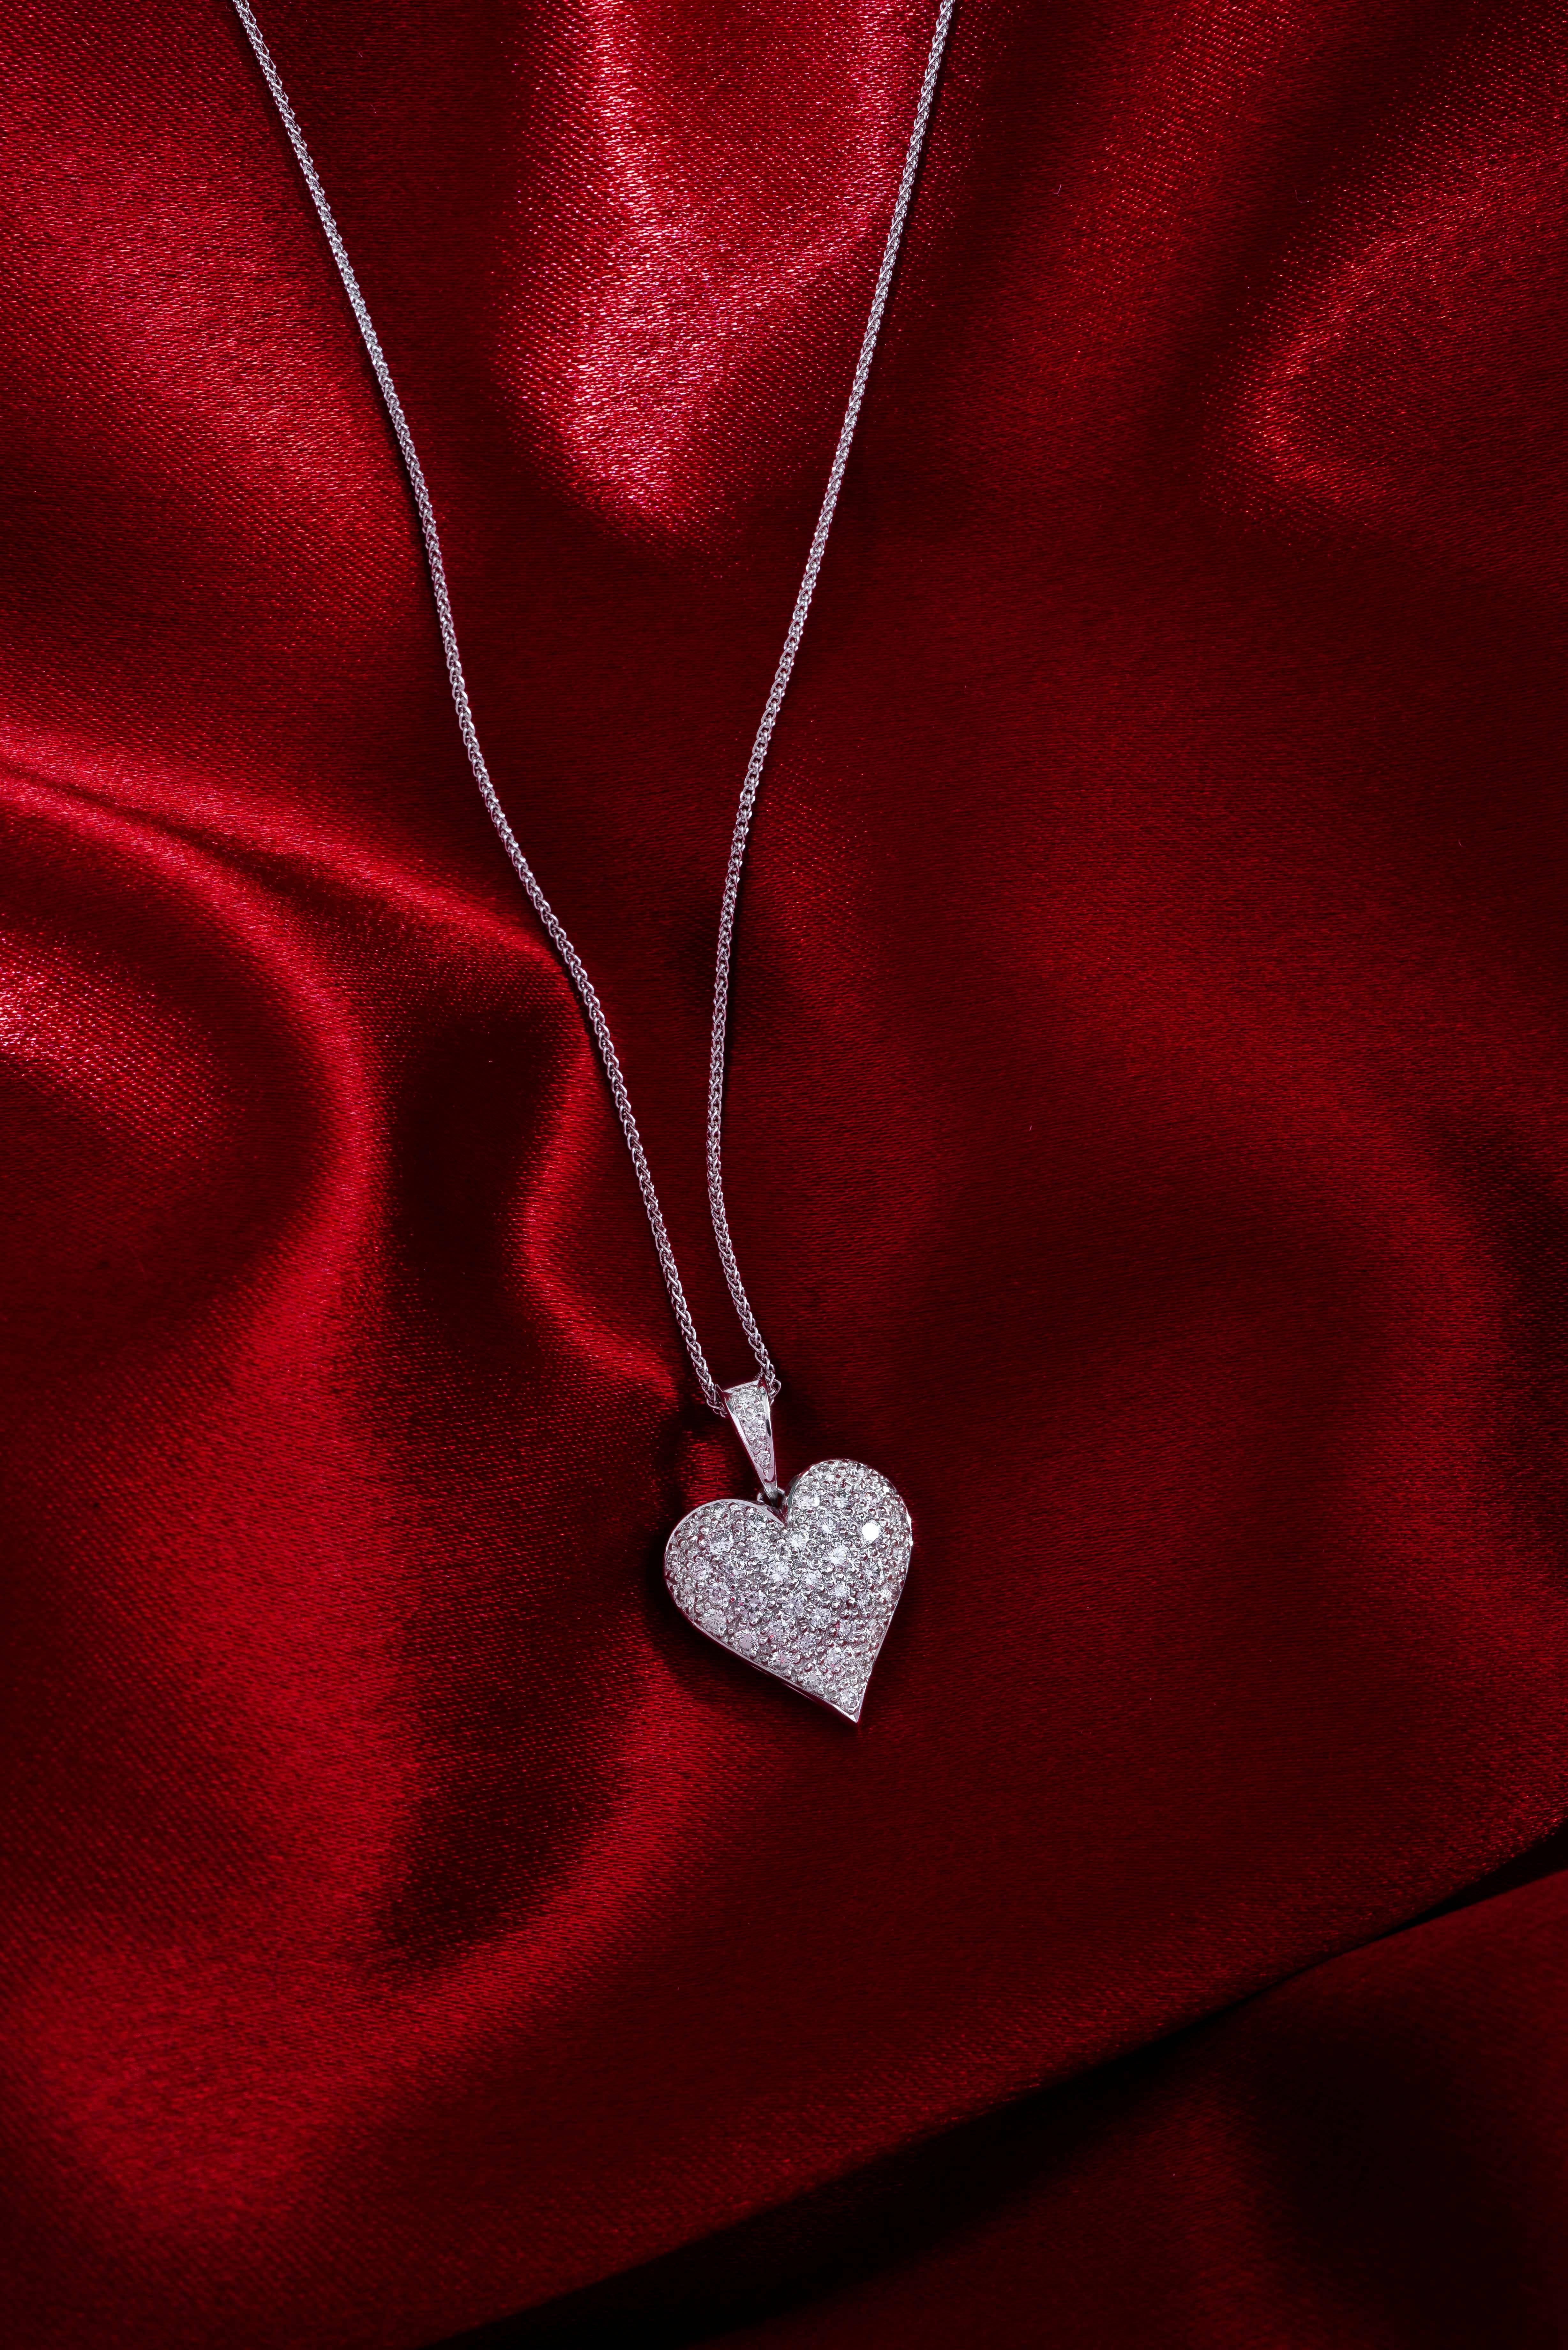 An eternal classic. A full curved beautifully sculpted heart pendant fully pavé set with round brilliant cut diamonds and detail in a diamond set hinged bail chain loop. The Full Diamond Heart has a generously curved rounded surface formed in 18